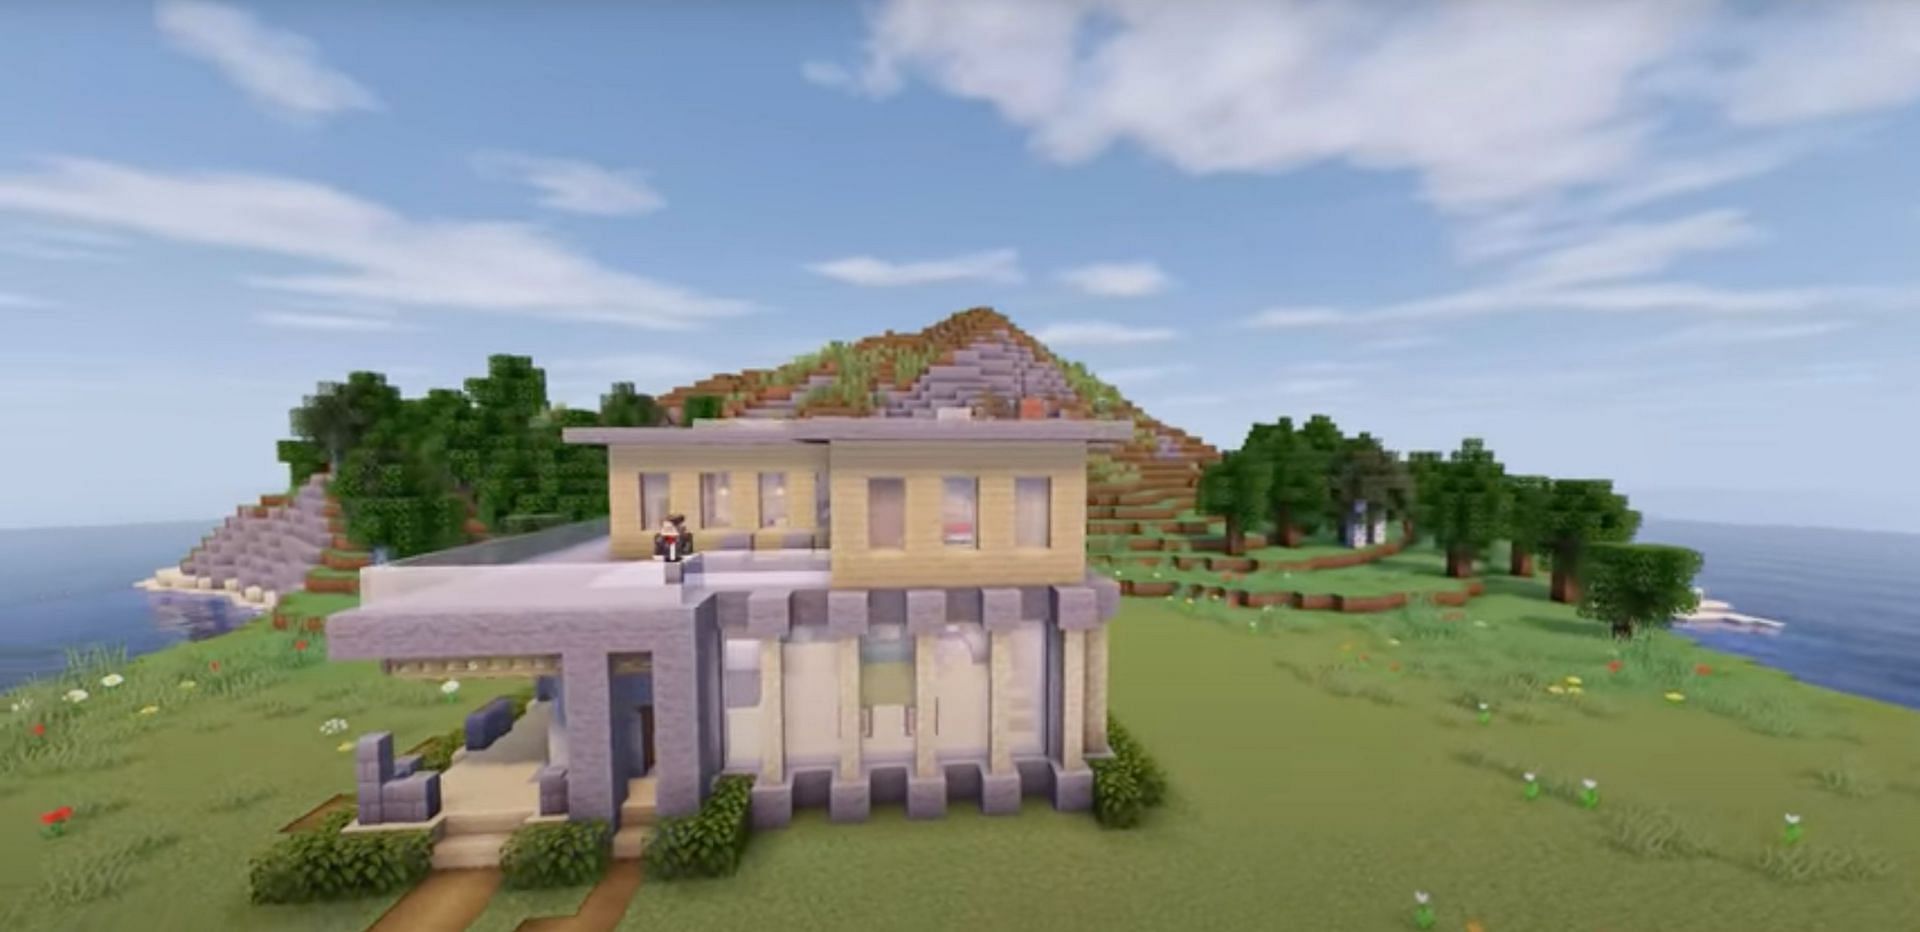 Players of Minecraft are able to create amazing looking modern builds using almost any material they can think of, including stone (Image via Greg Builds/YouTube)